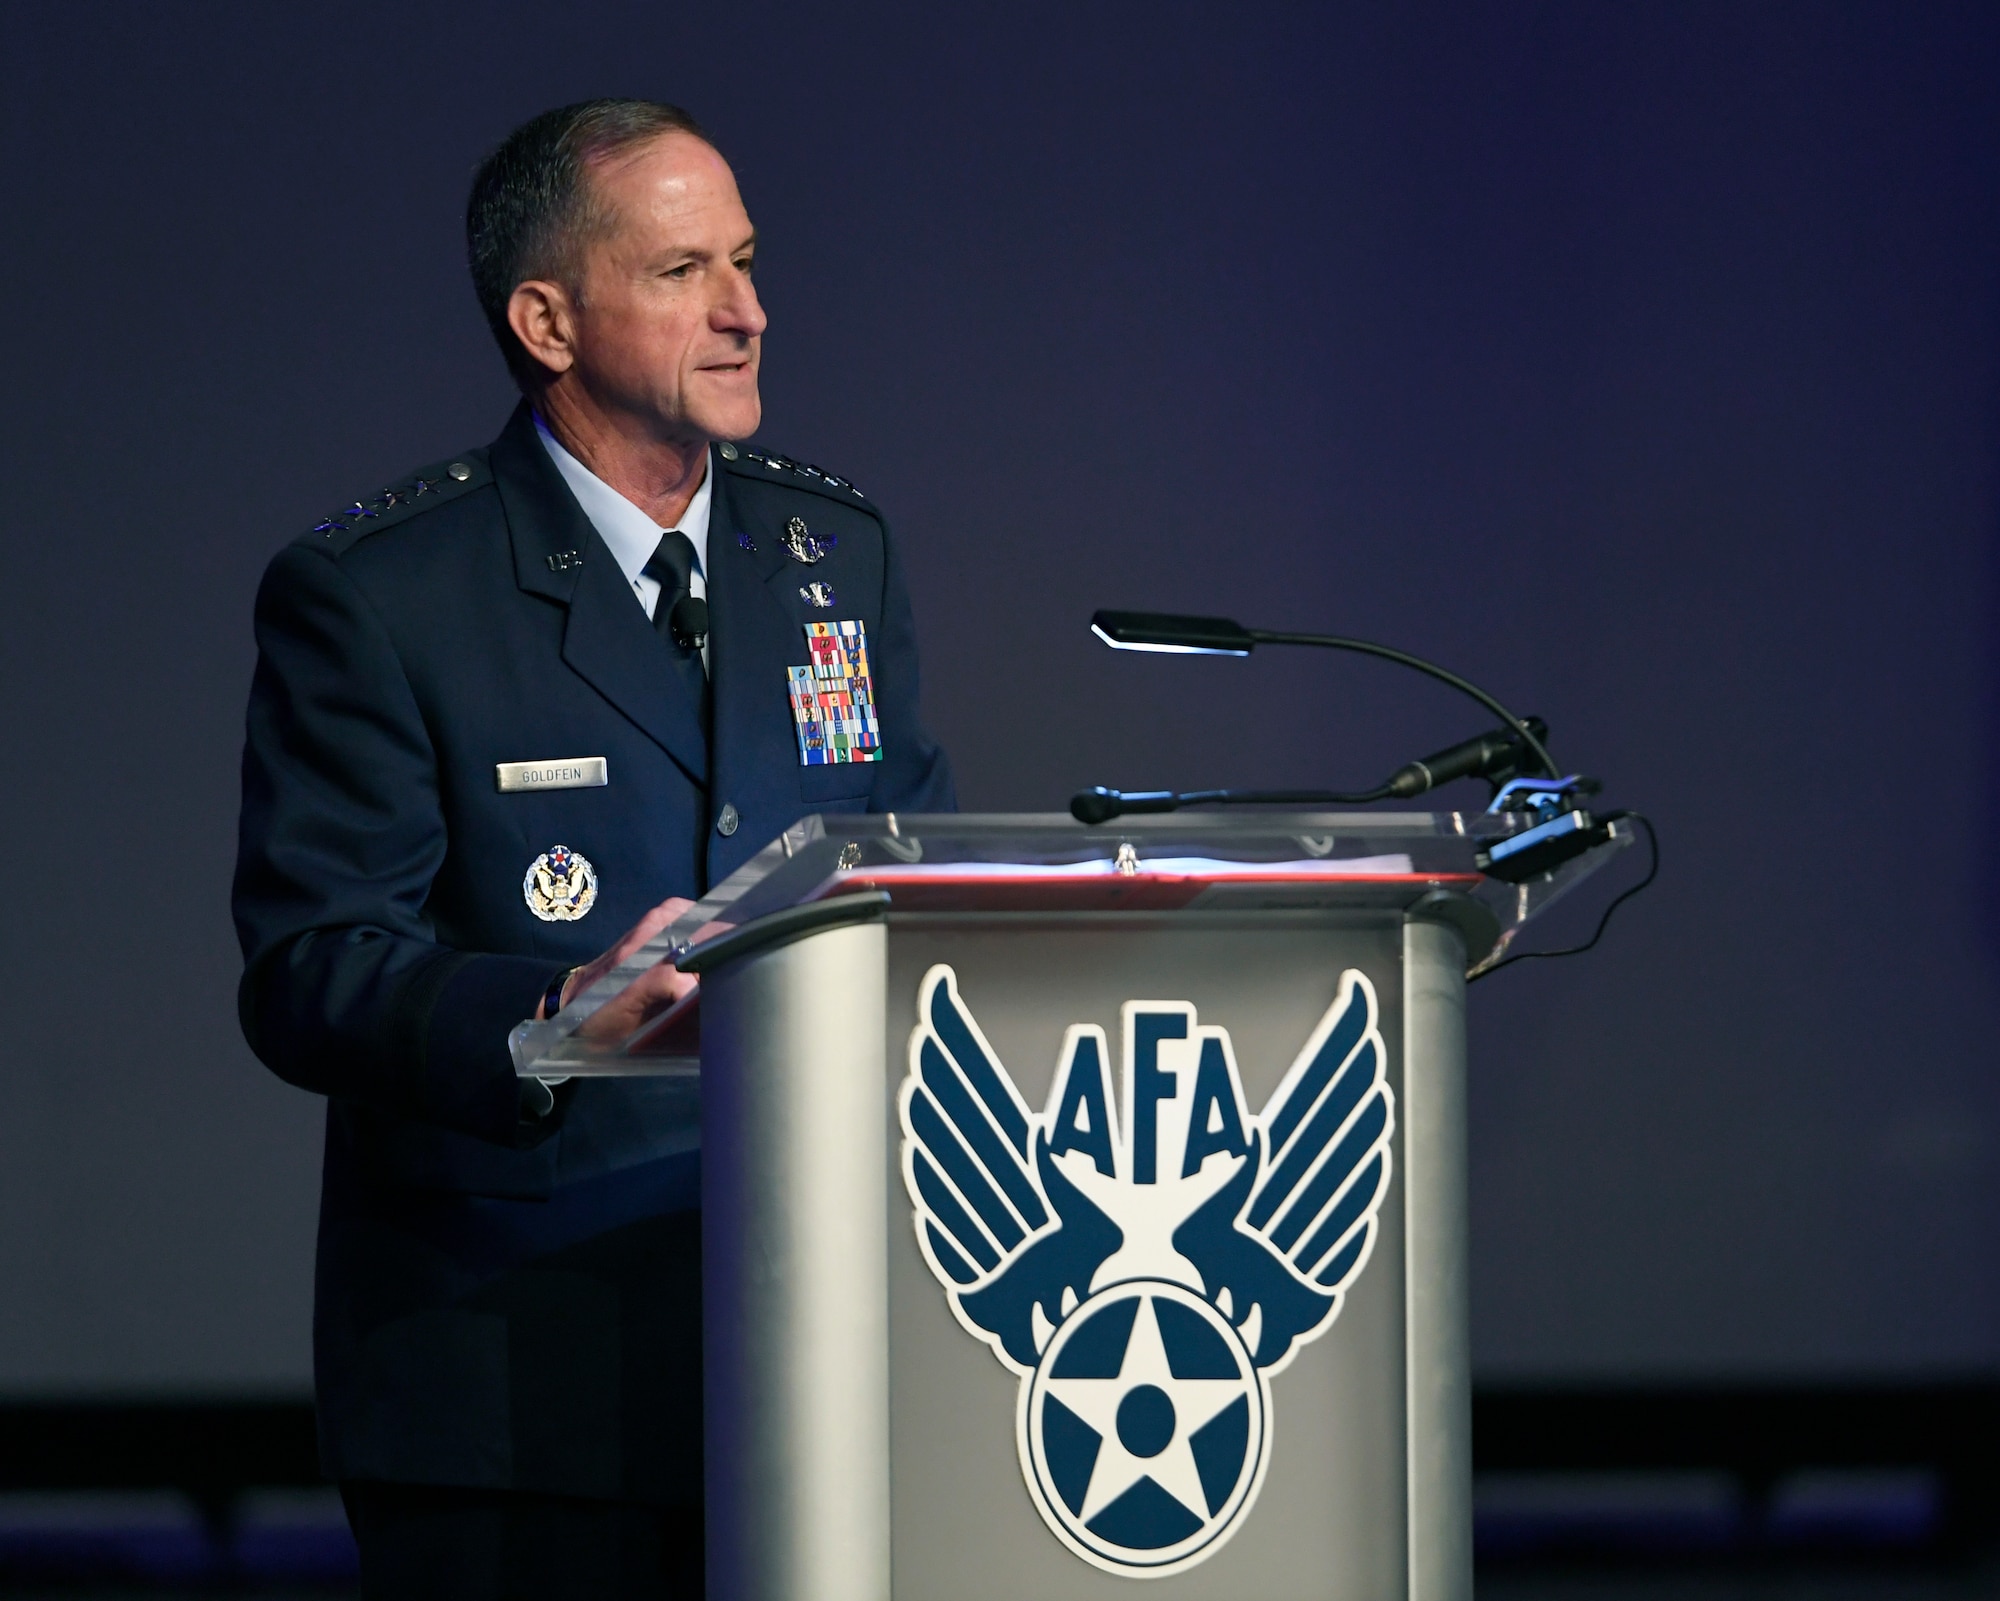 Air Force Chief of Staff Gen. David L. Goldfein delivers an Air Force Update speech during the Air Force Association Air, Space and Cyber Conference in National Harbor, Md., Sept. 17, 2019 The ASC Conference is a professional development seminar that offers the opportunity for Department of Defense personnel to participate in forums, speeches and workshops. (U.S. Air Force photo by Staff Sgt. Chad Trujillo)